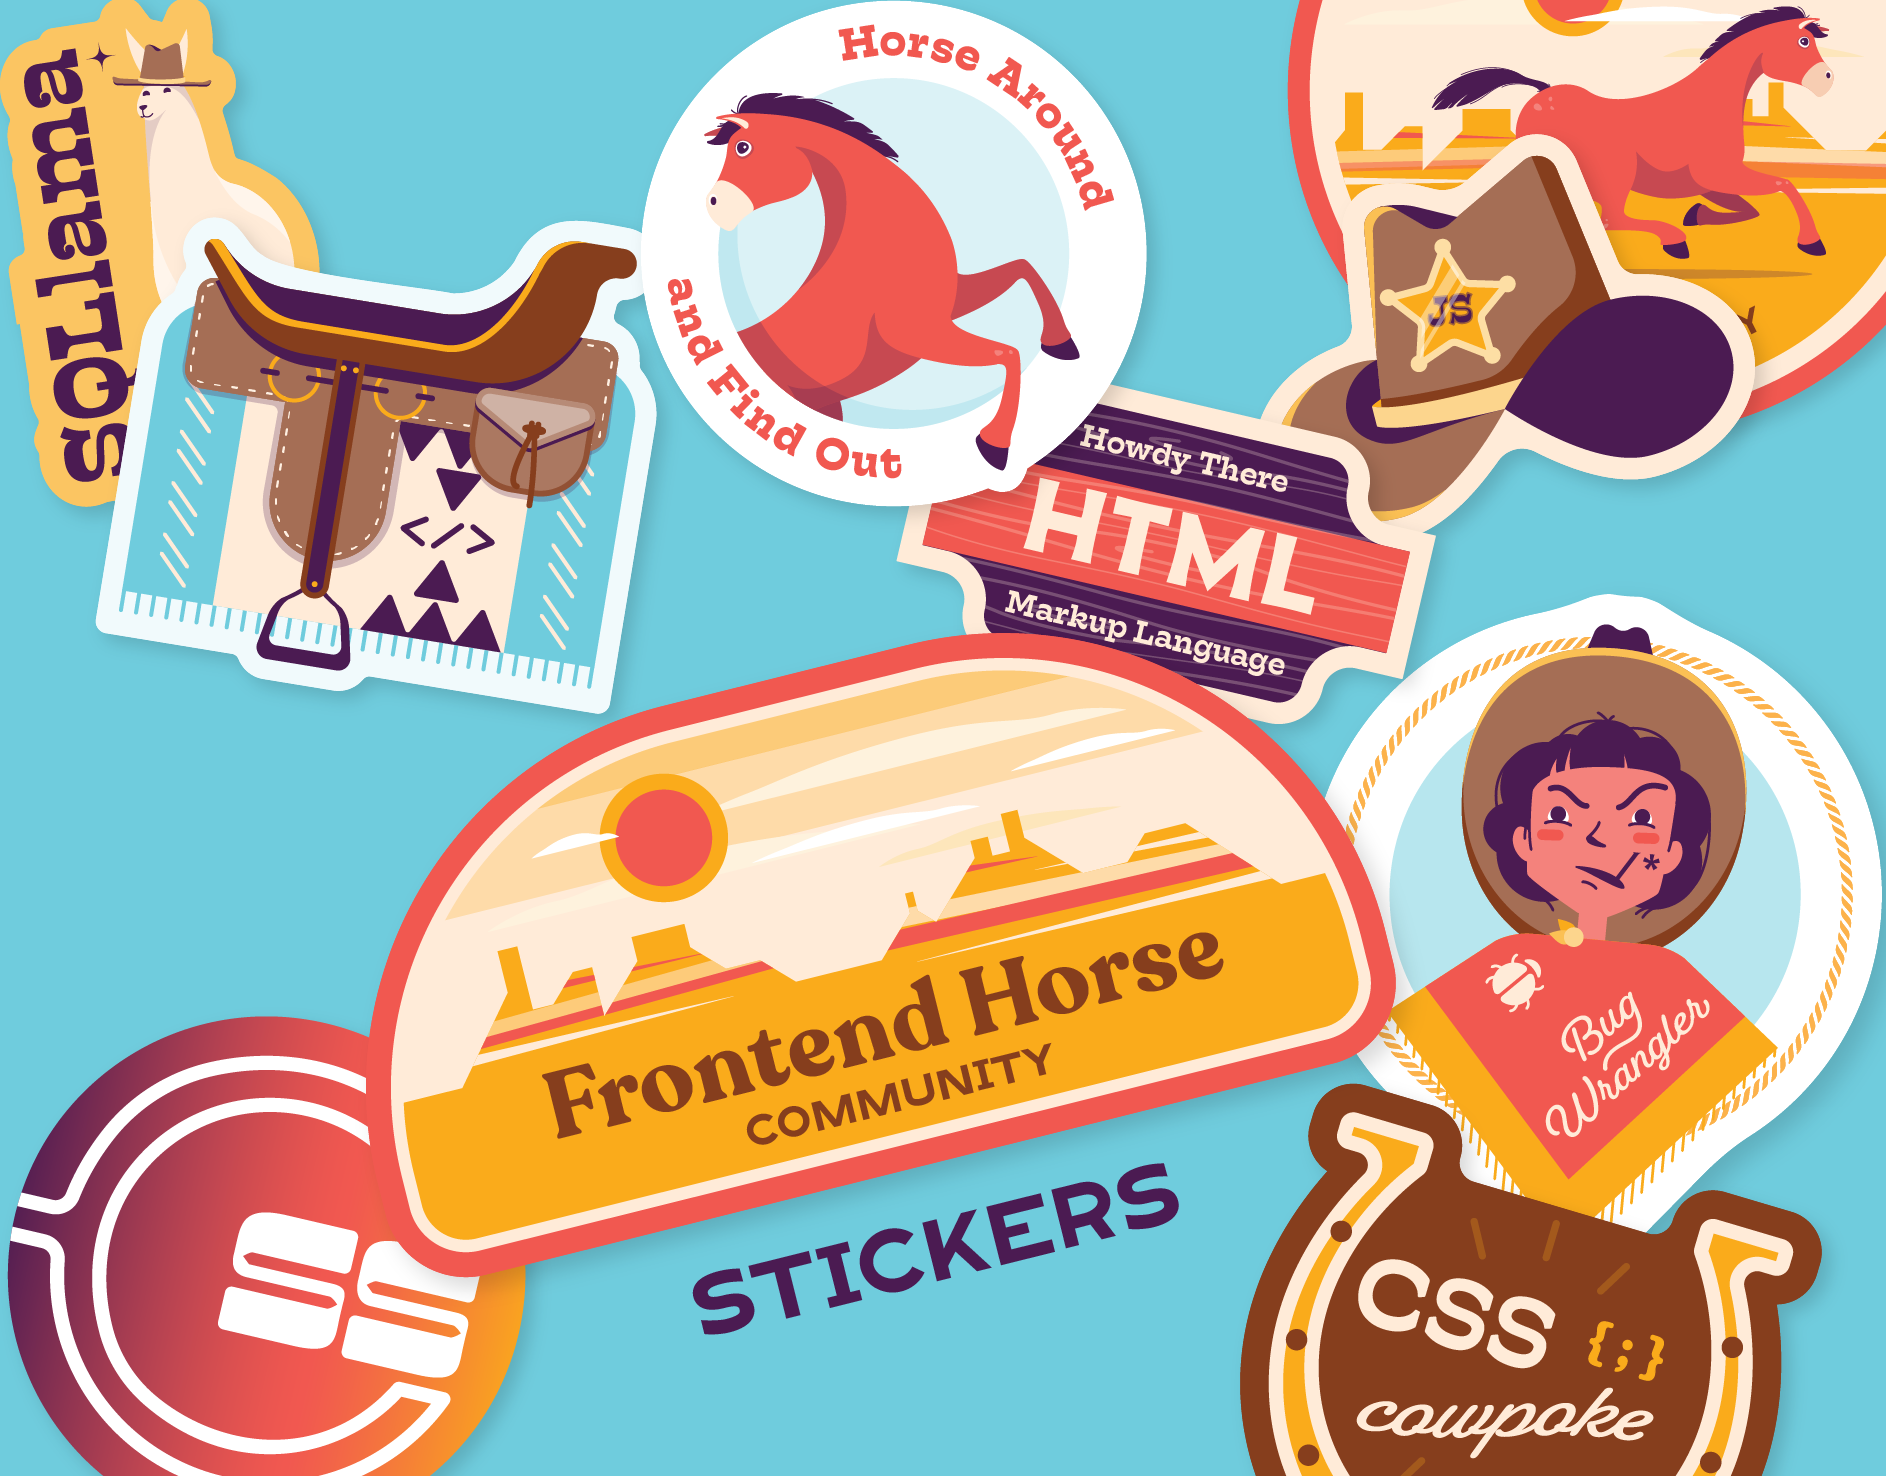 Frontend Horse Community Stickers. October 2021